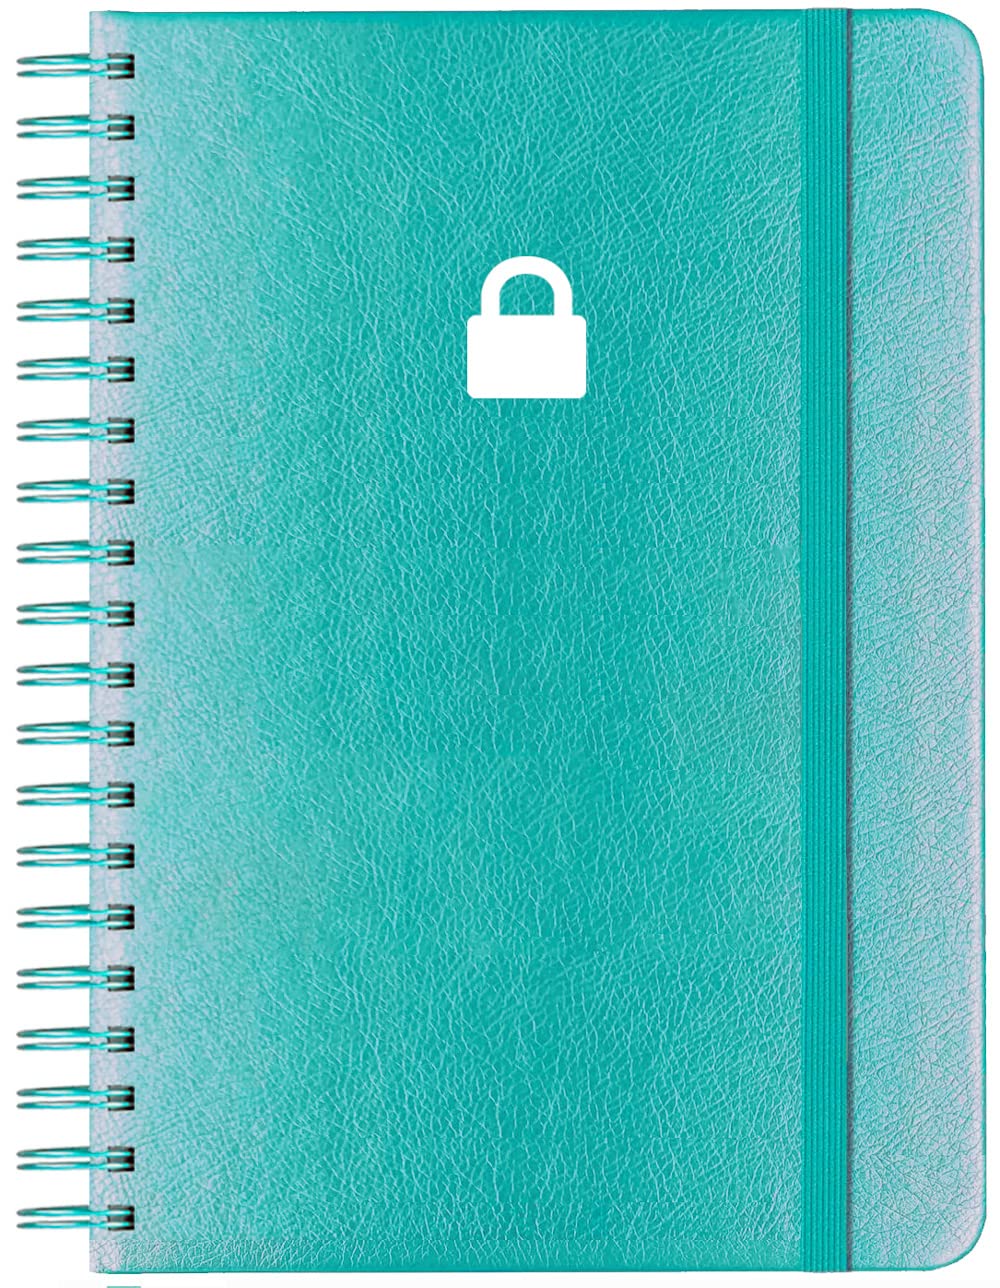 Nokingo Spiral Password Book with Alphabetical Tabs - 5x7 inch Password Organizer with A-Z Tabs for Internet Login, Website, Use